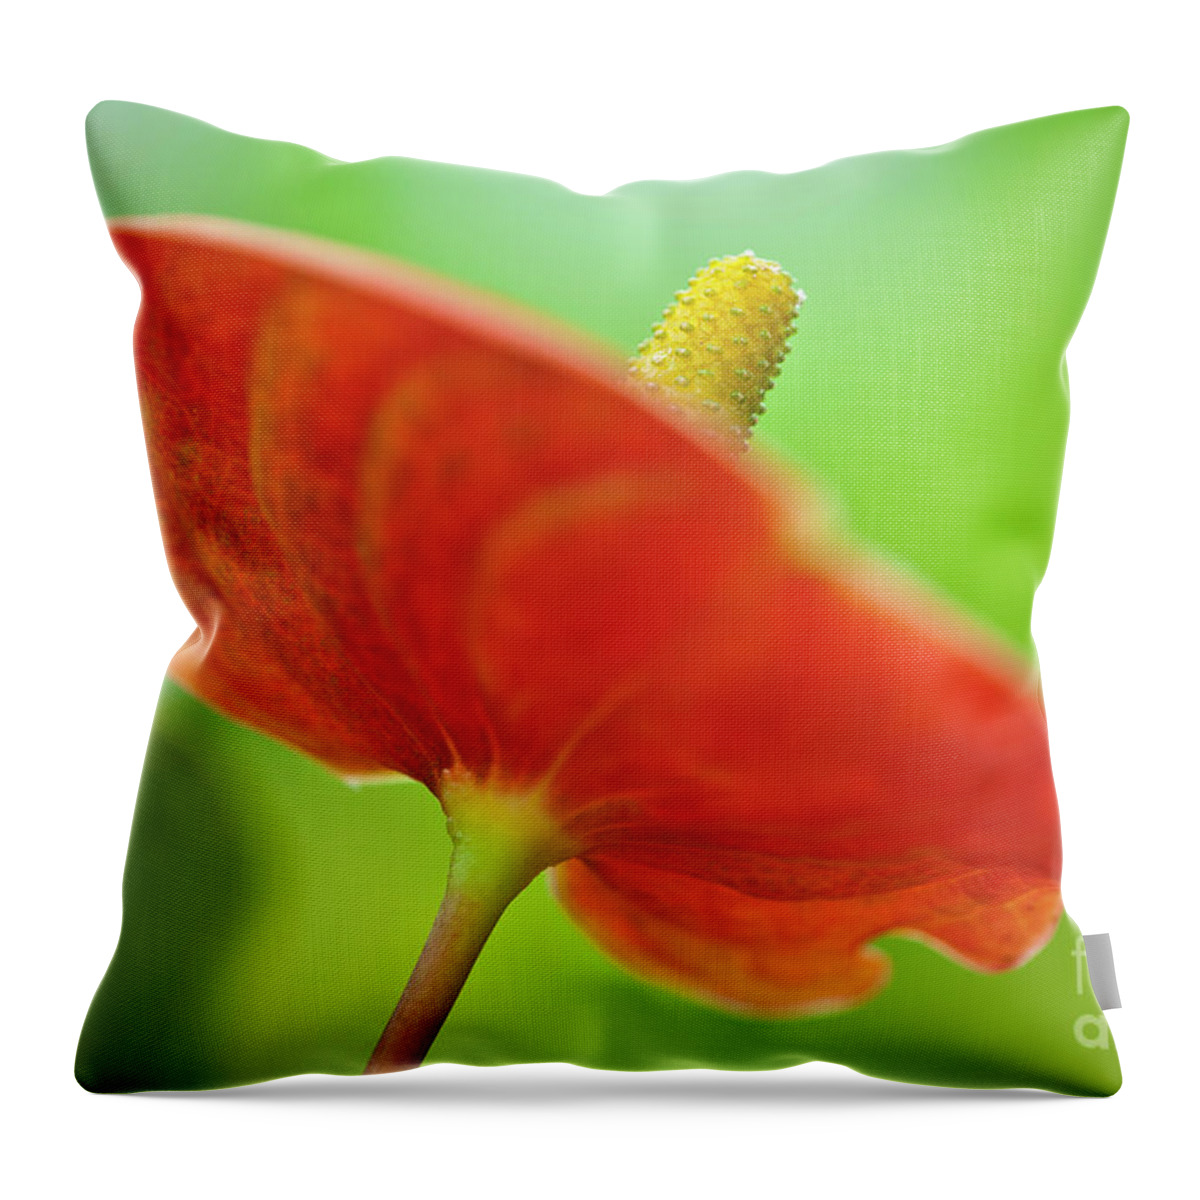 Anthurie Throw Pillow featuring the photograph Flamingo Flower 2 by Heiko Koehrer-Wagner